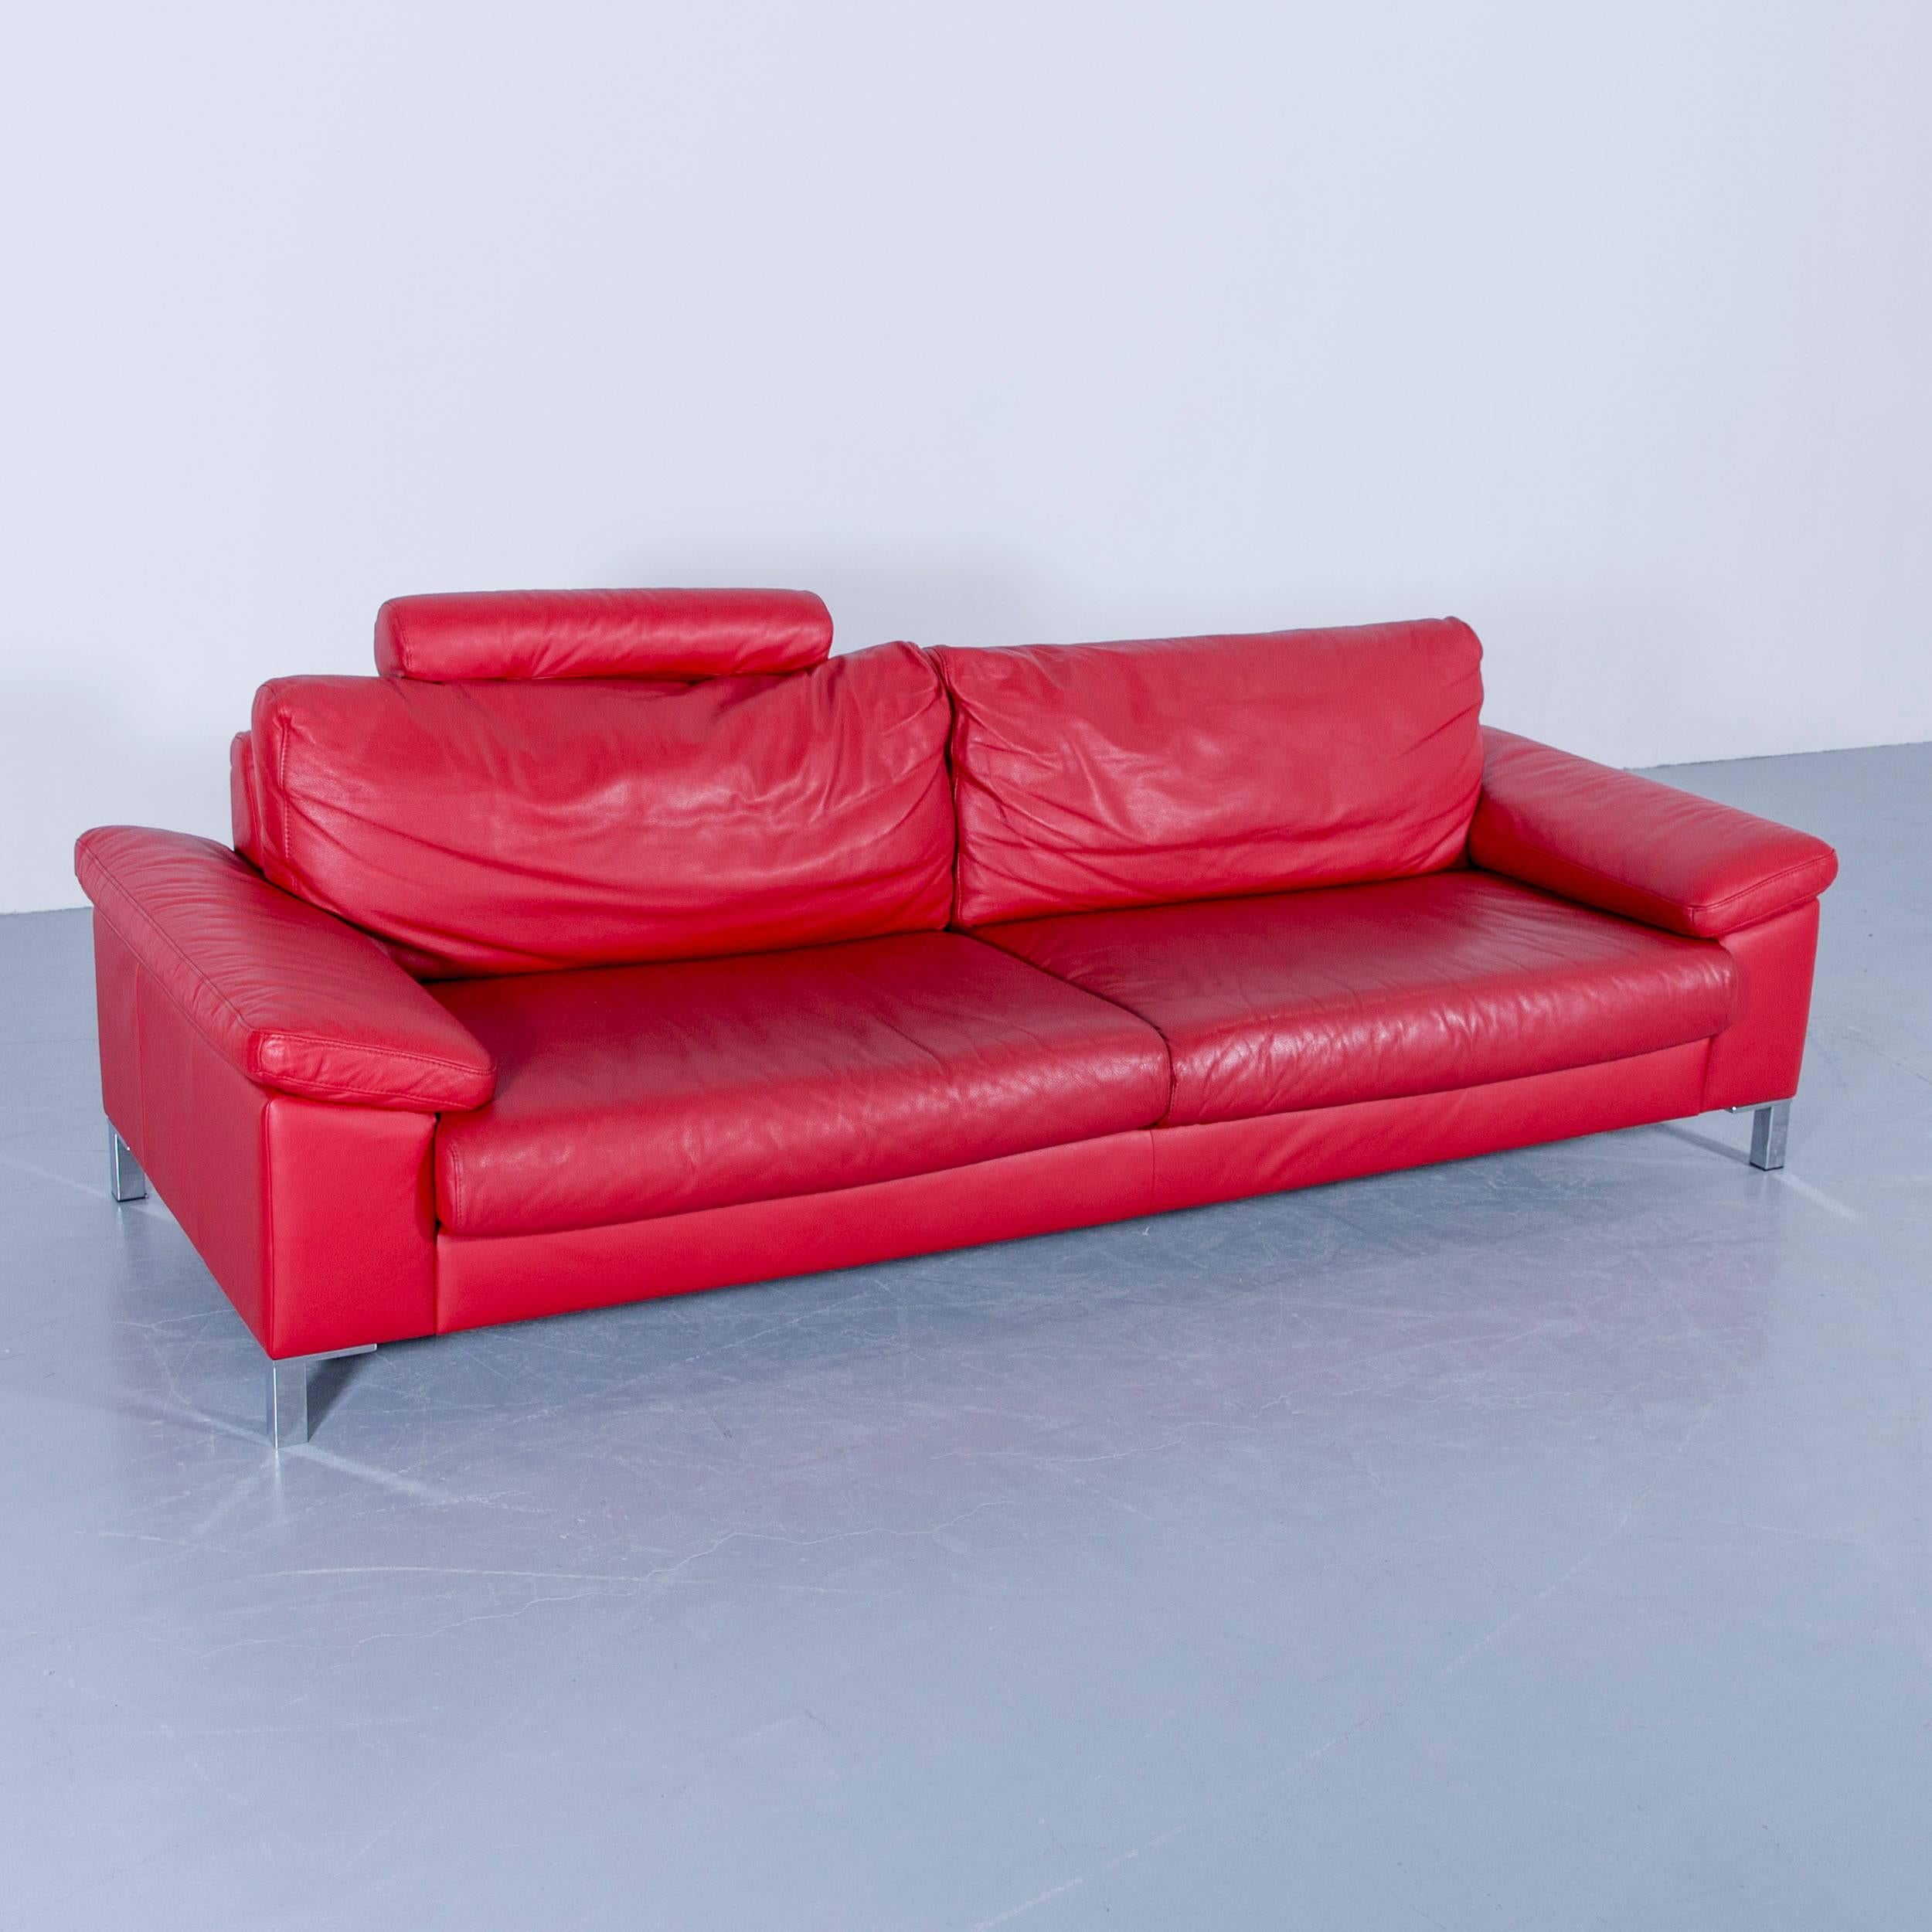 Contemporary Designer Sofa Red Three-Seat Leather Modern Couch Head Rest